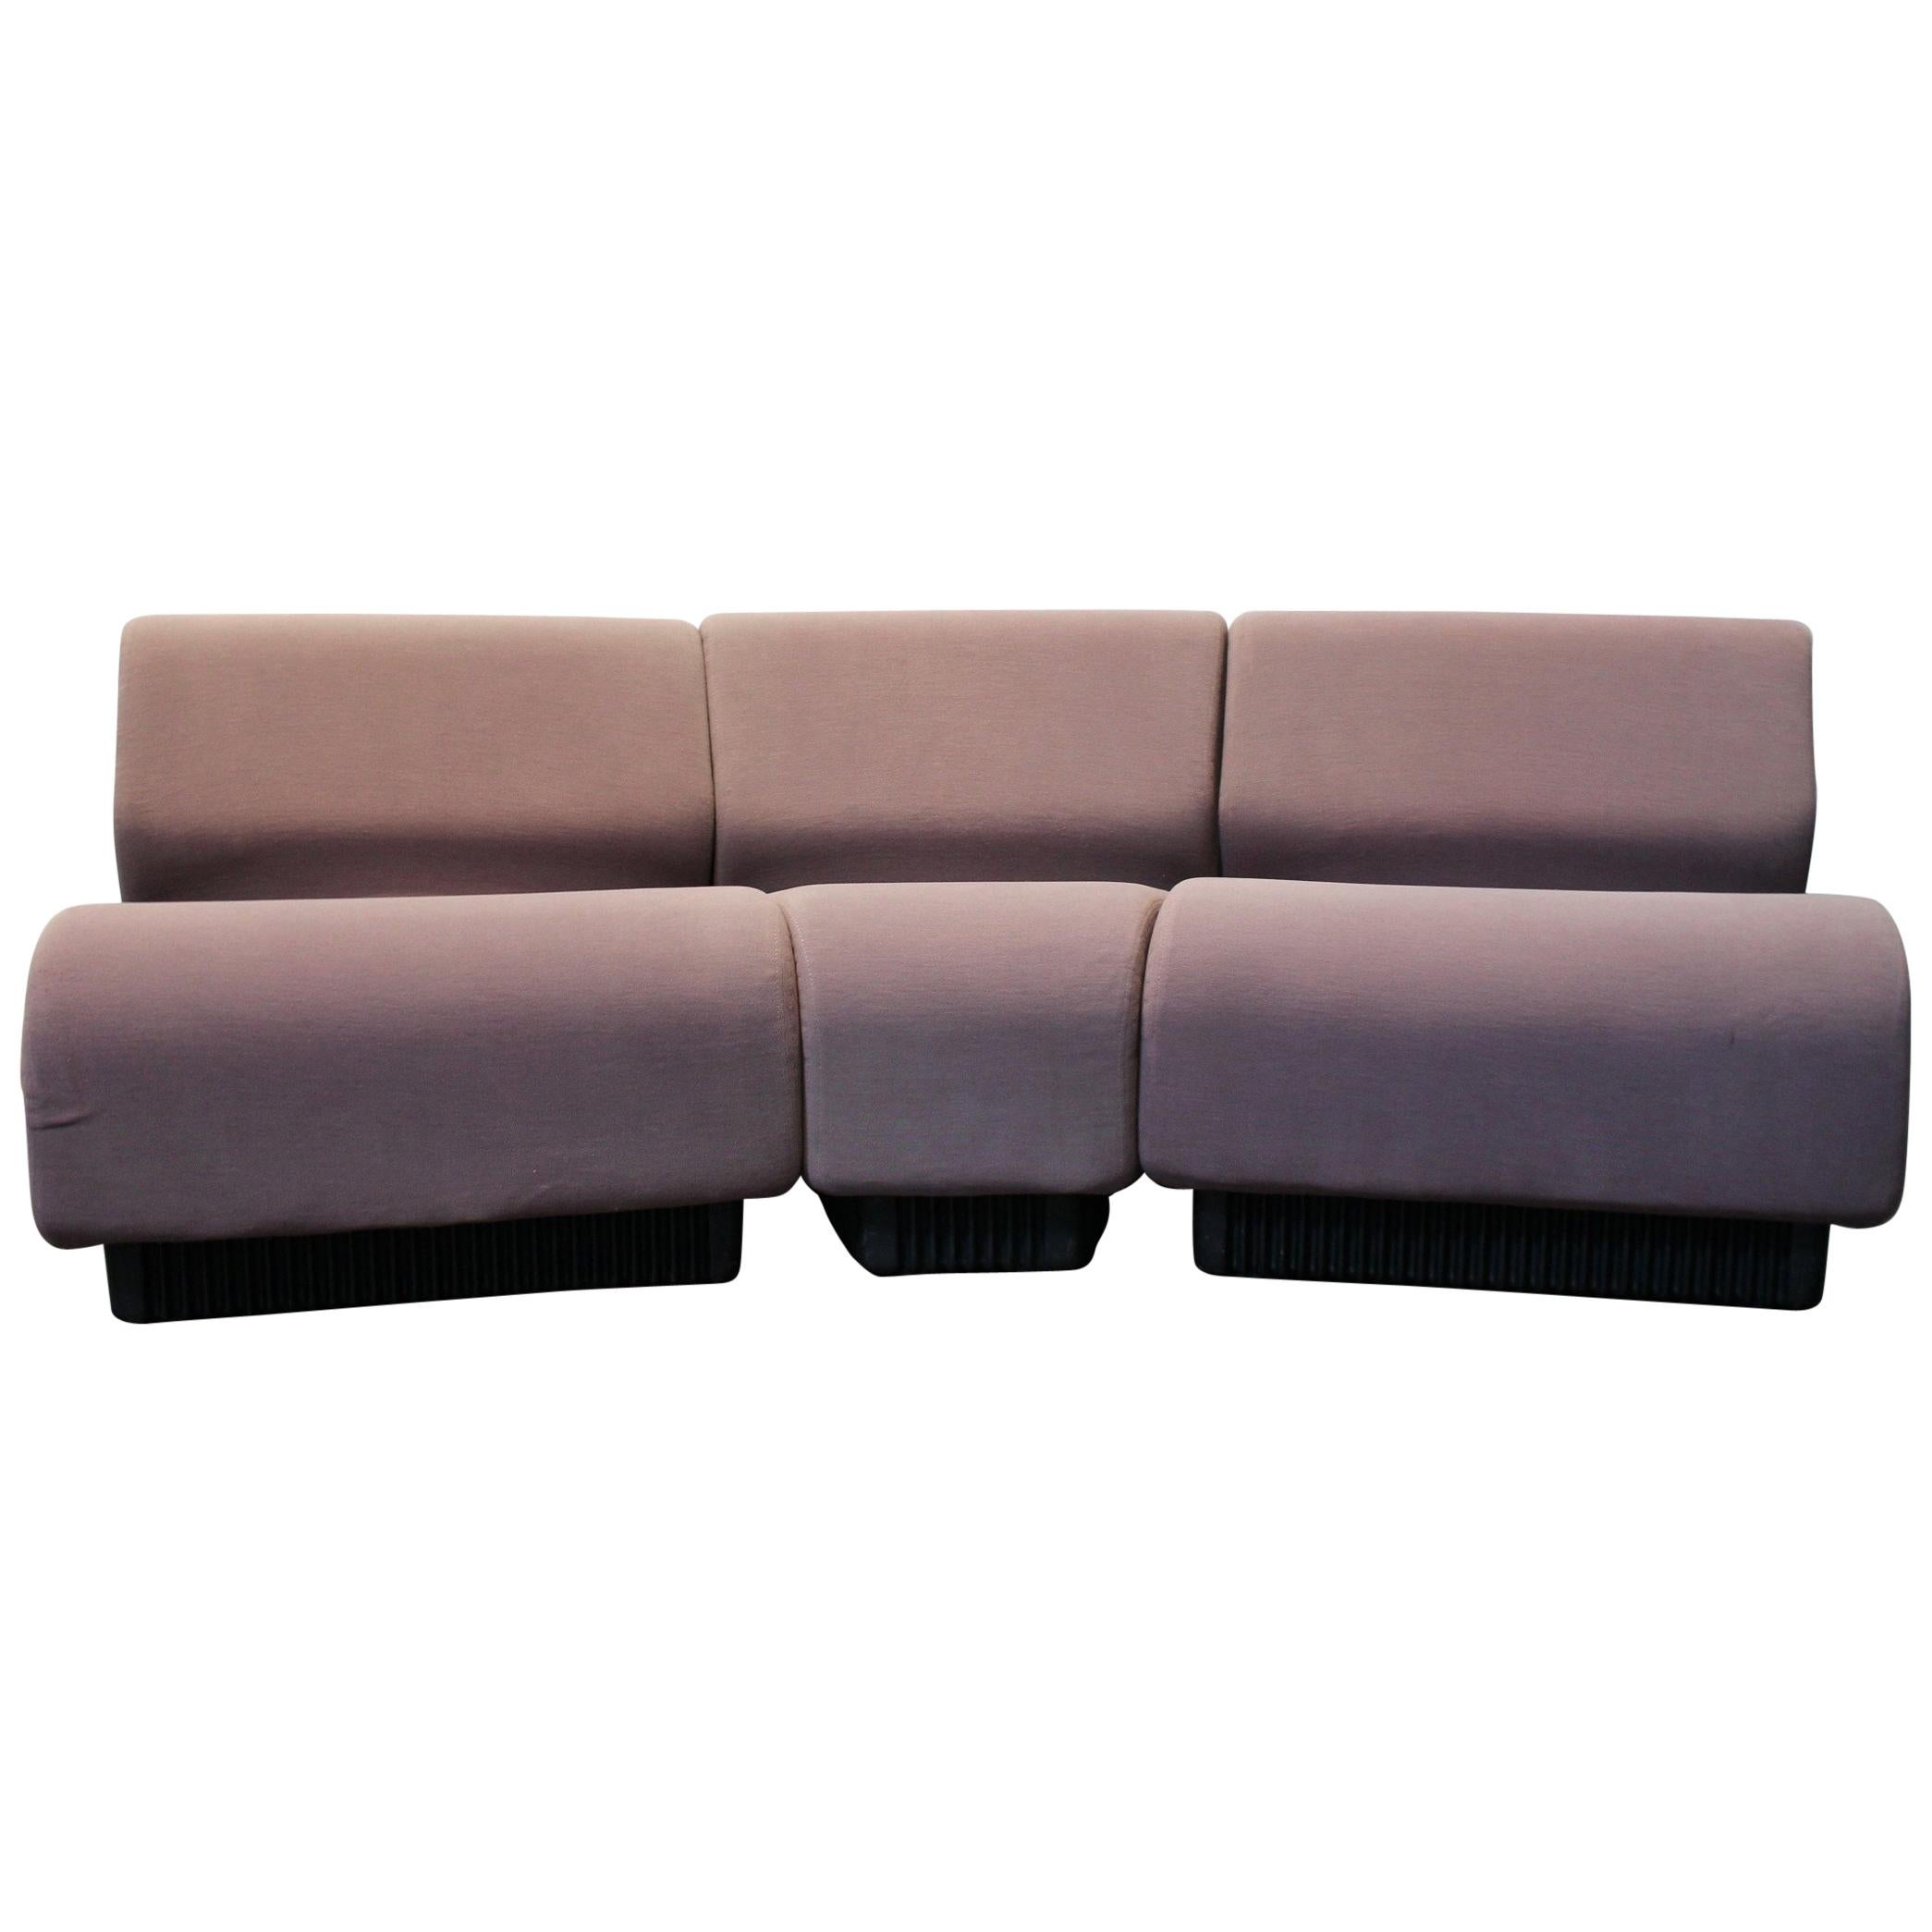 Modern Modular Settee Sofa by Don Chadwick for Herman Miller For Sale